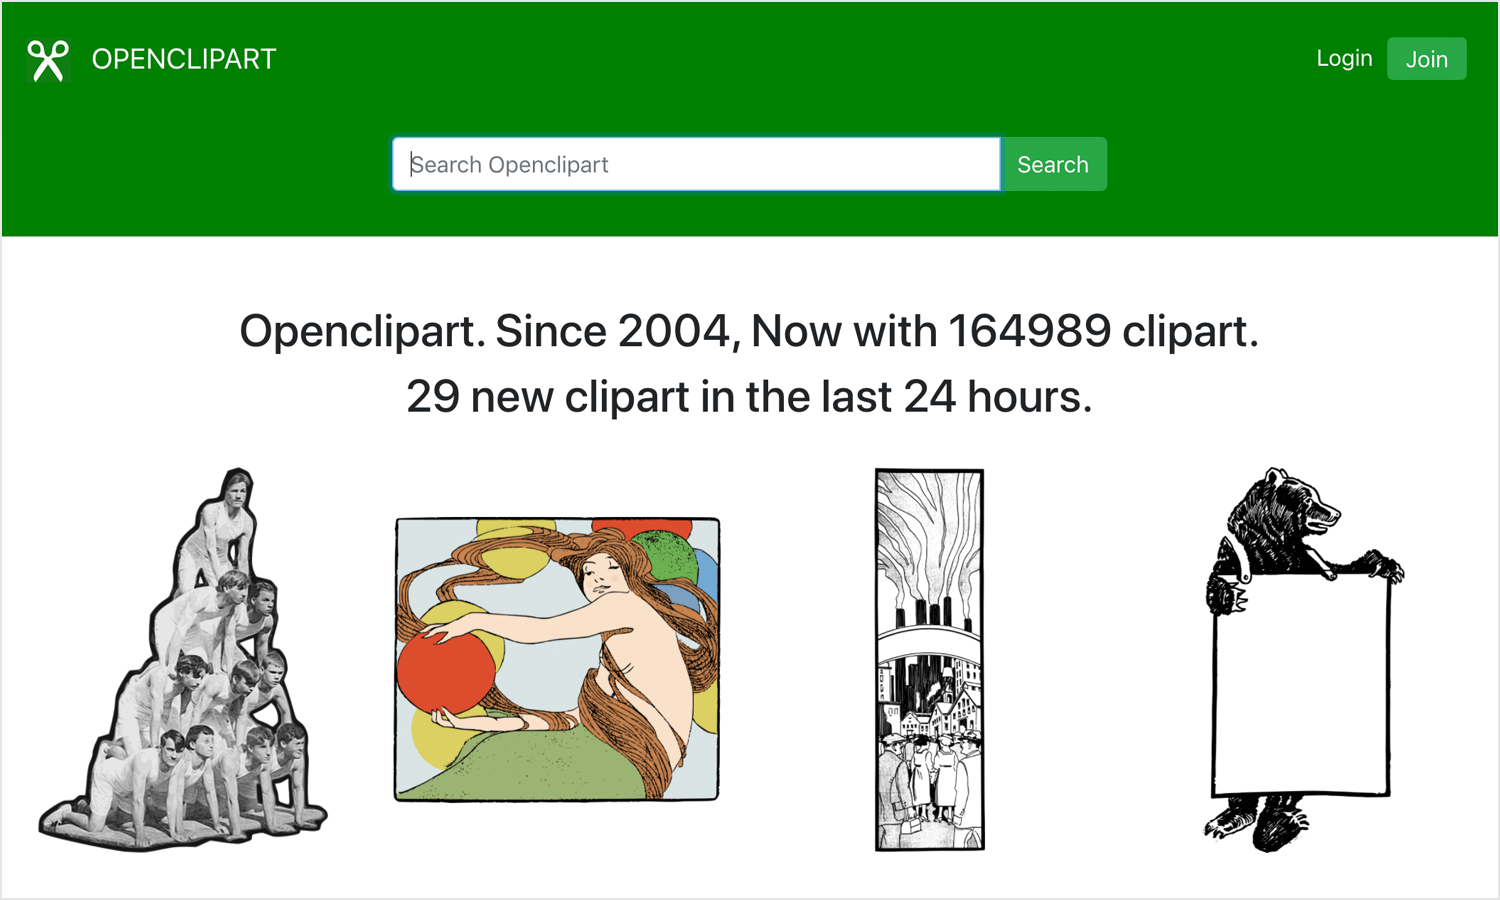 Free vector images - Openclipart homepage